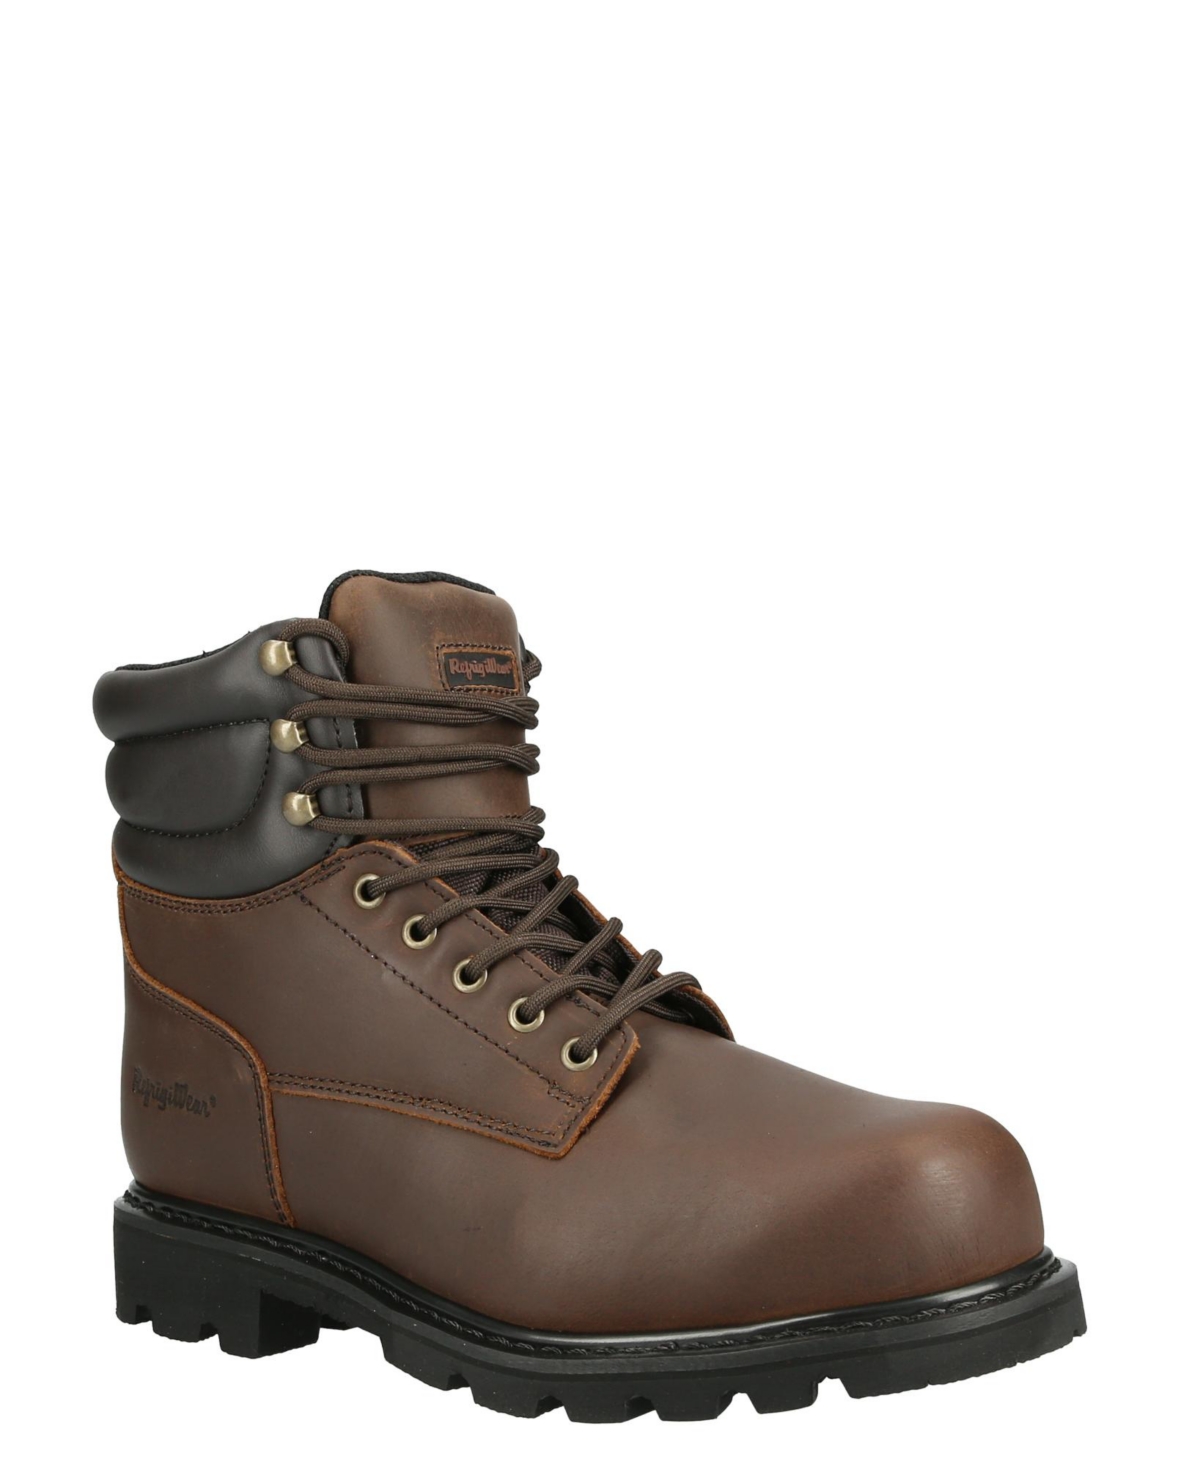 Men's Classic Leather Work Boots - Brown